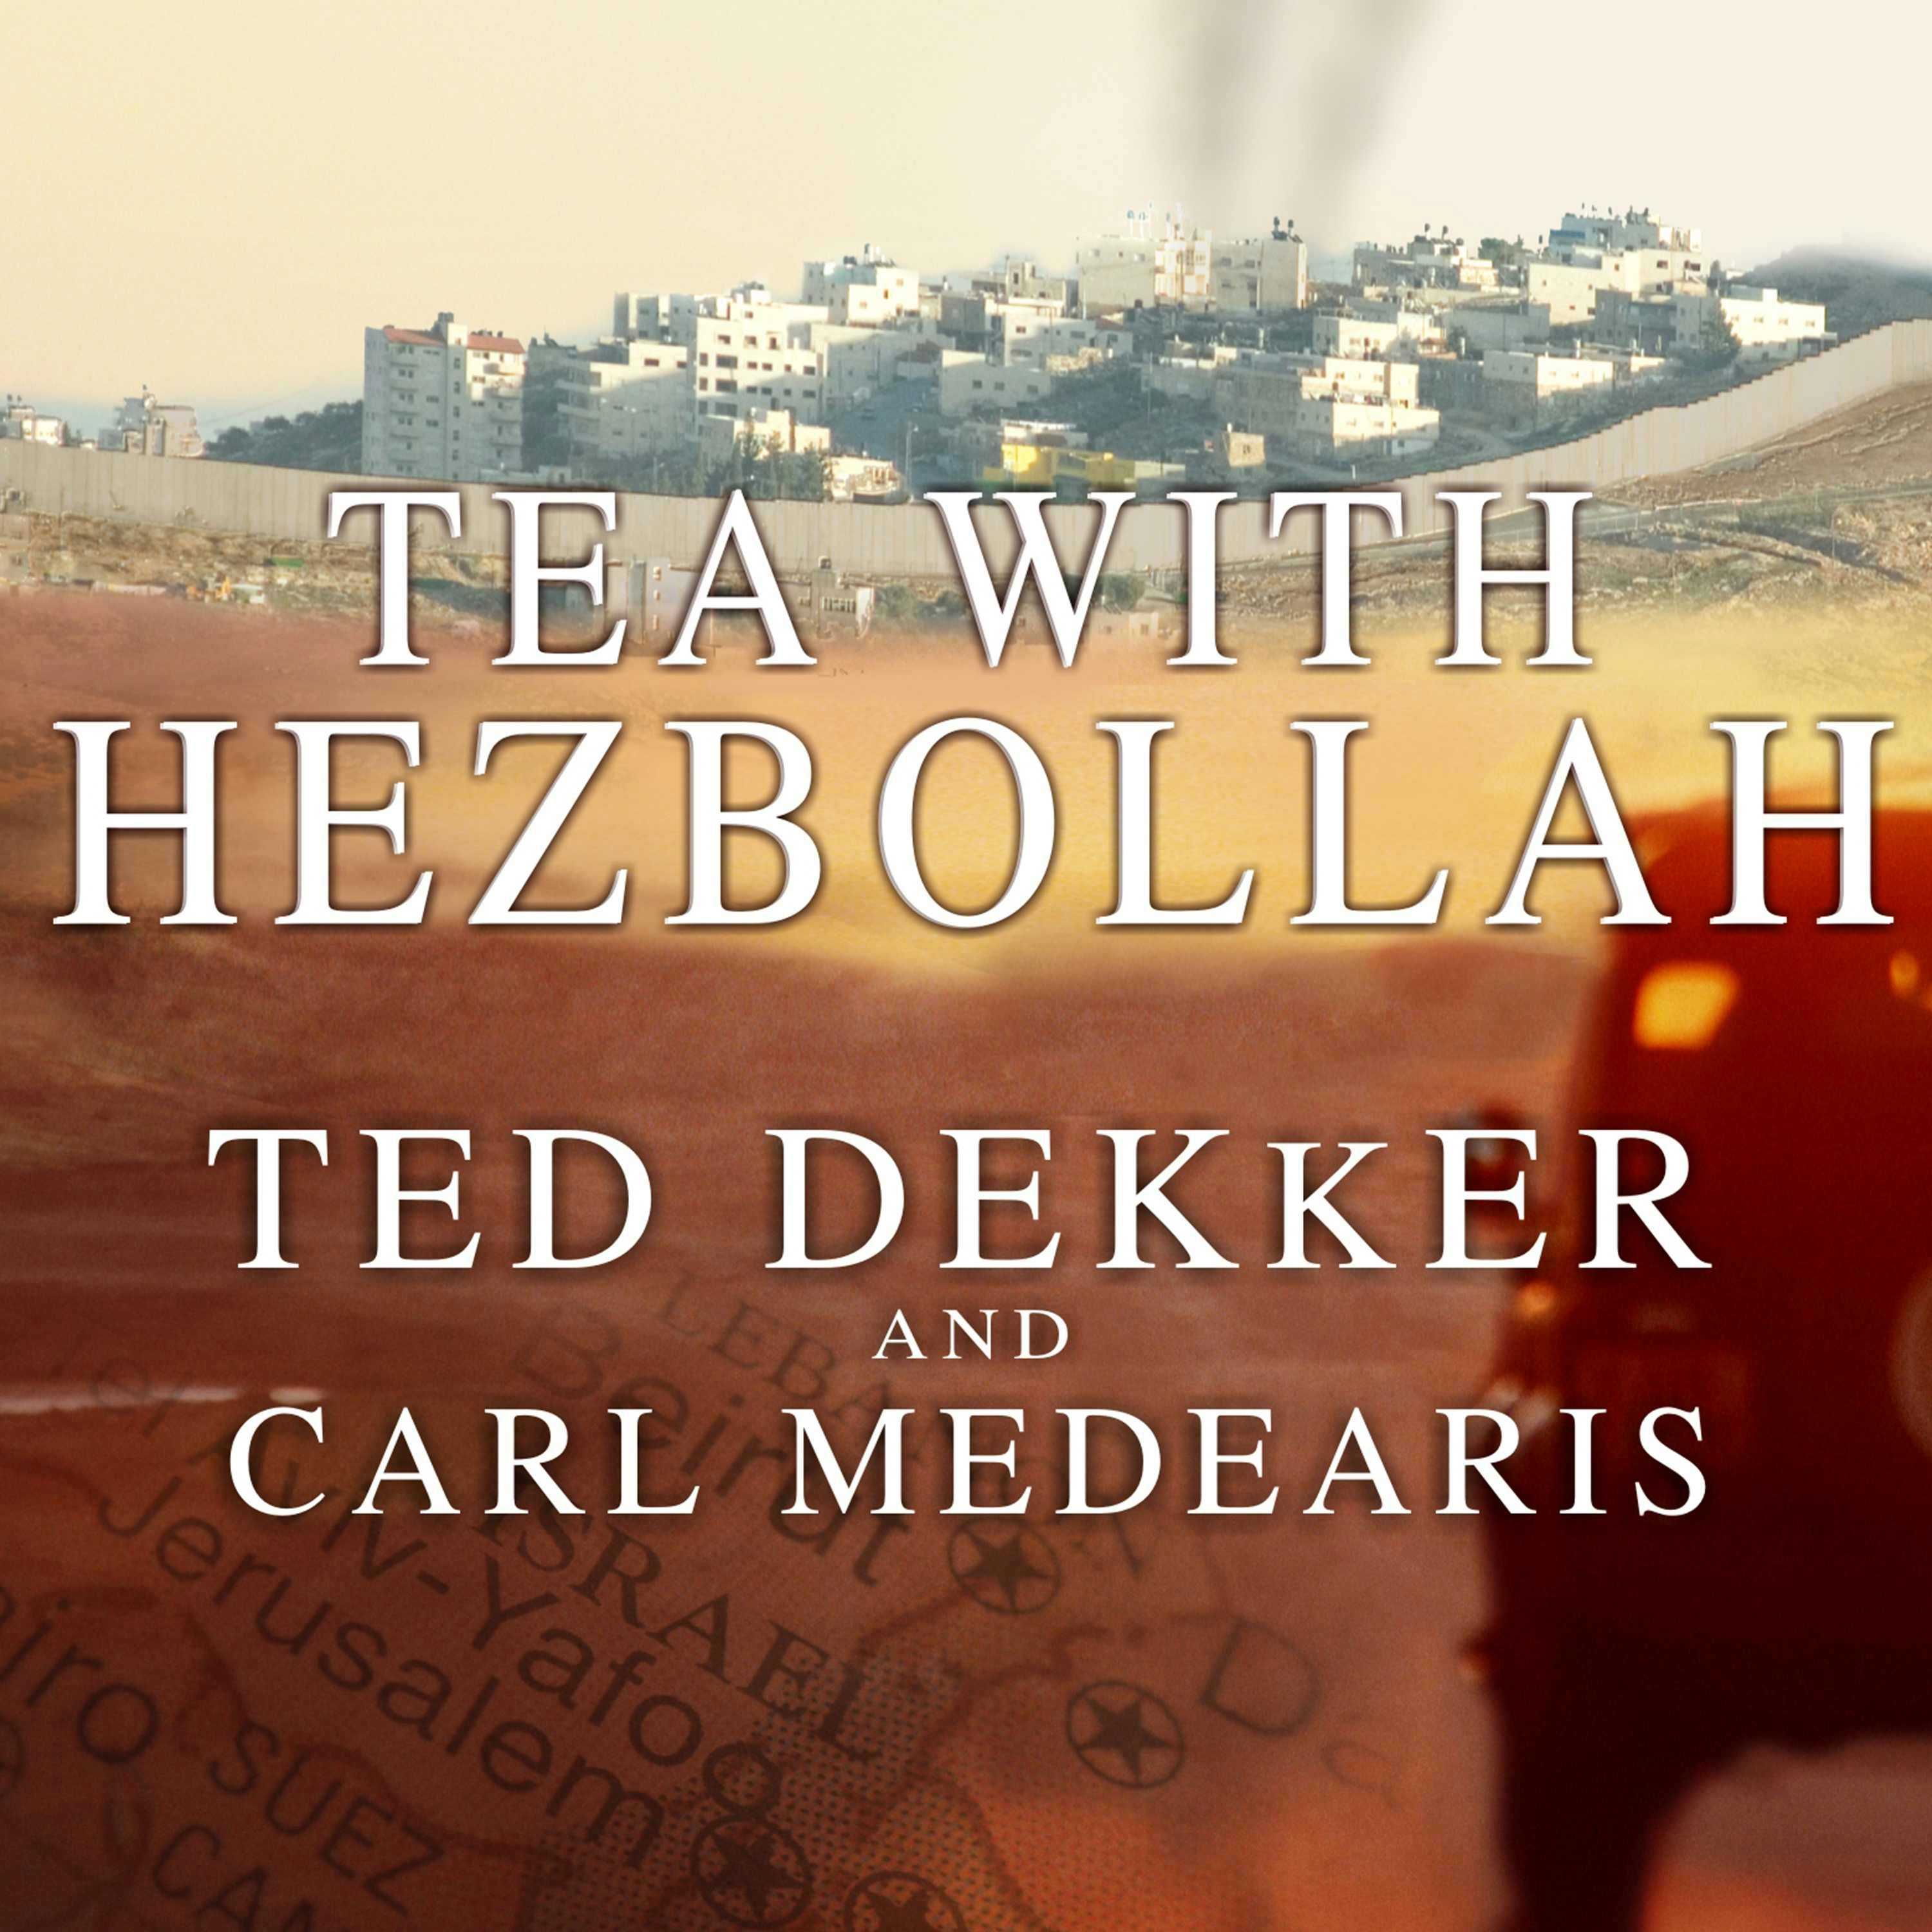 Tea with Hezbollah: Sitting at the Enemies' Table, Our Journey Through the Middle East - undefined